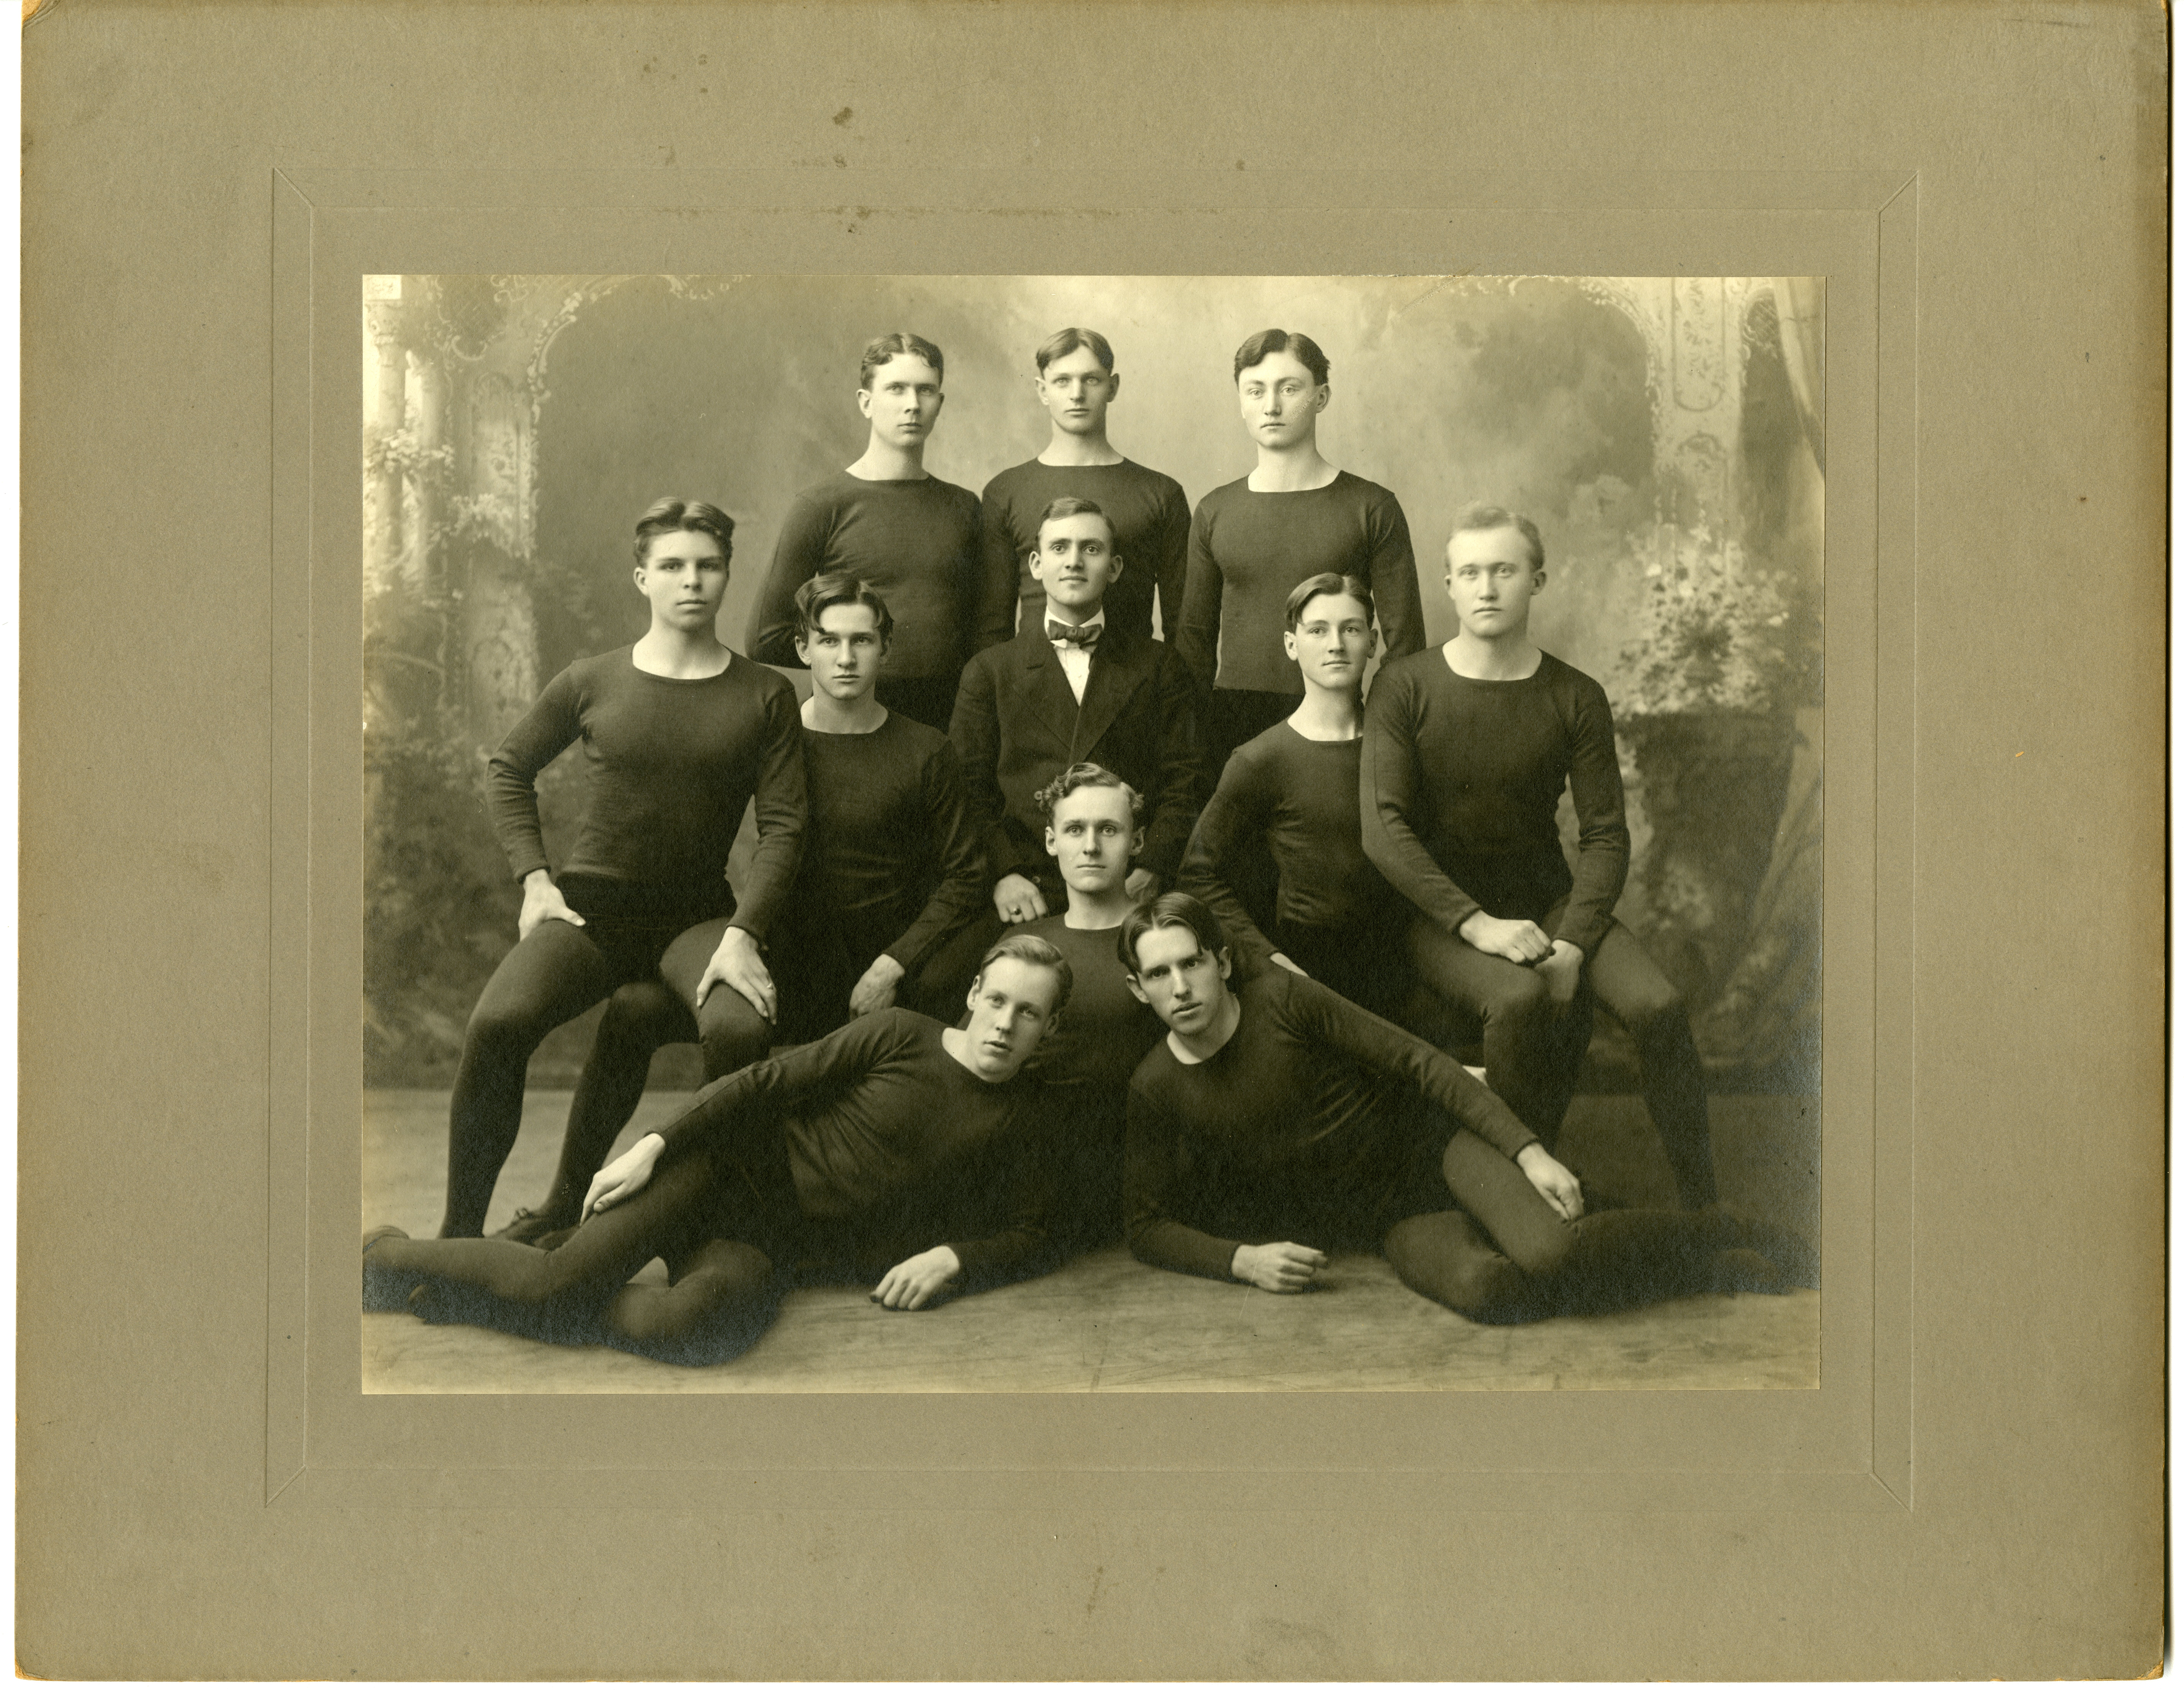 Group of men pose in studio for team photo.